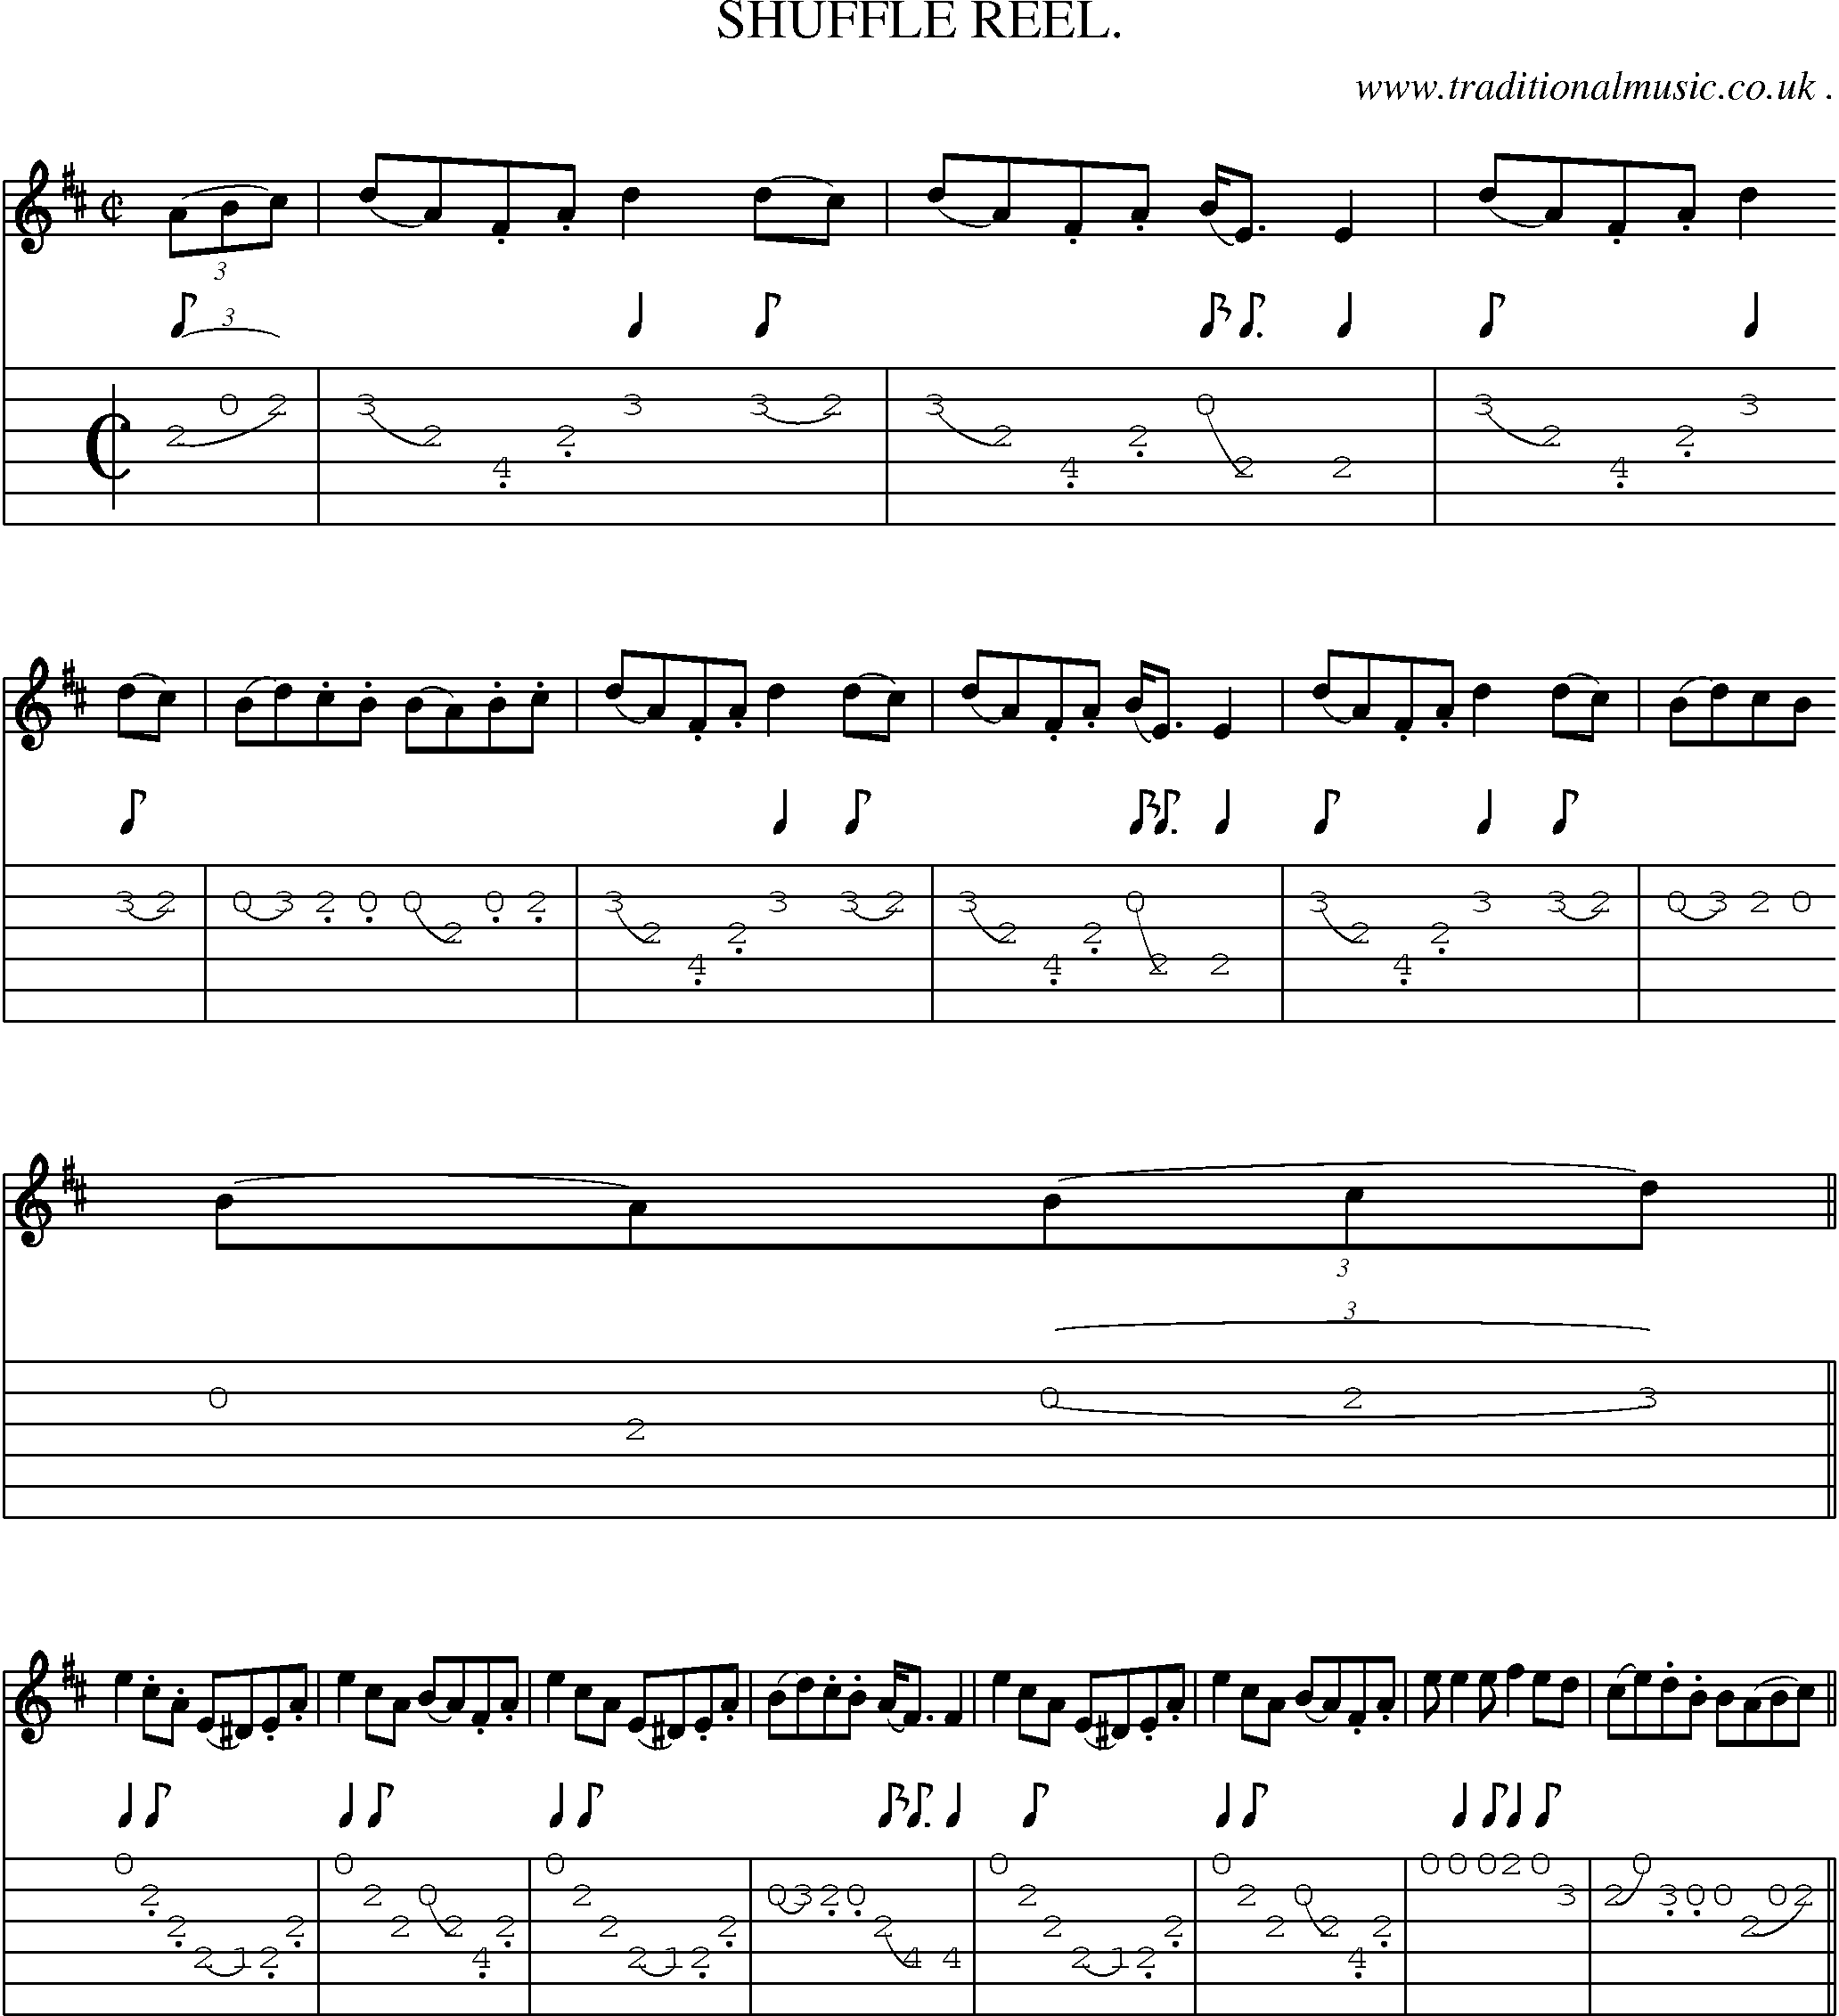 Sheet-Music and Guitar Tabs for Shuffle Reel